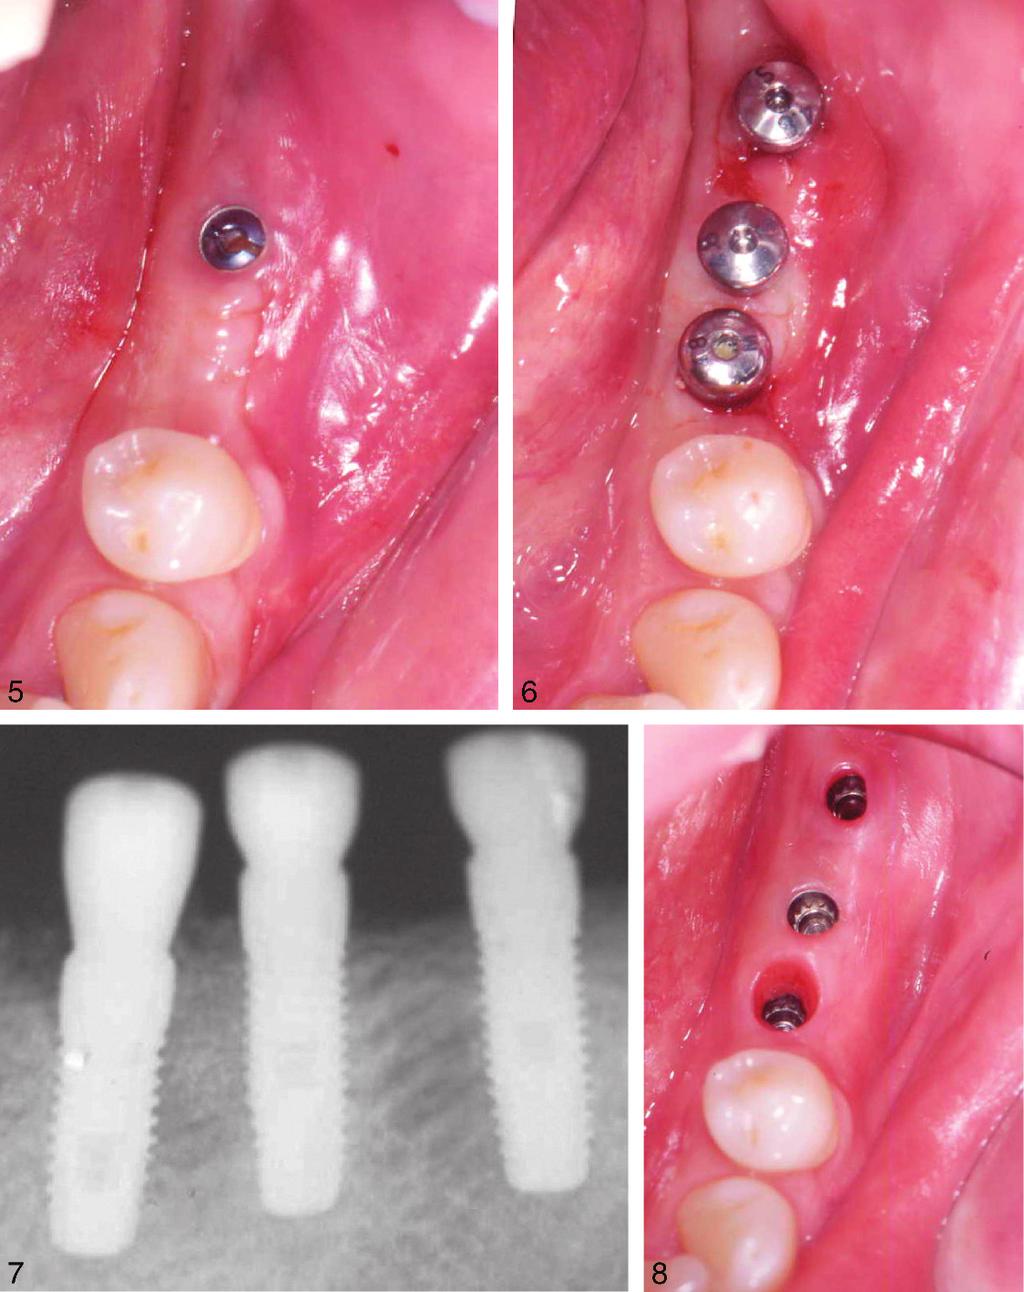 Park FIGURES 5 8. FIGURE 5. The occlusal view showing the exposure of the cover screw. FIGURE 6. Clinical view after connection of the healing abutments. FIGURE 7.